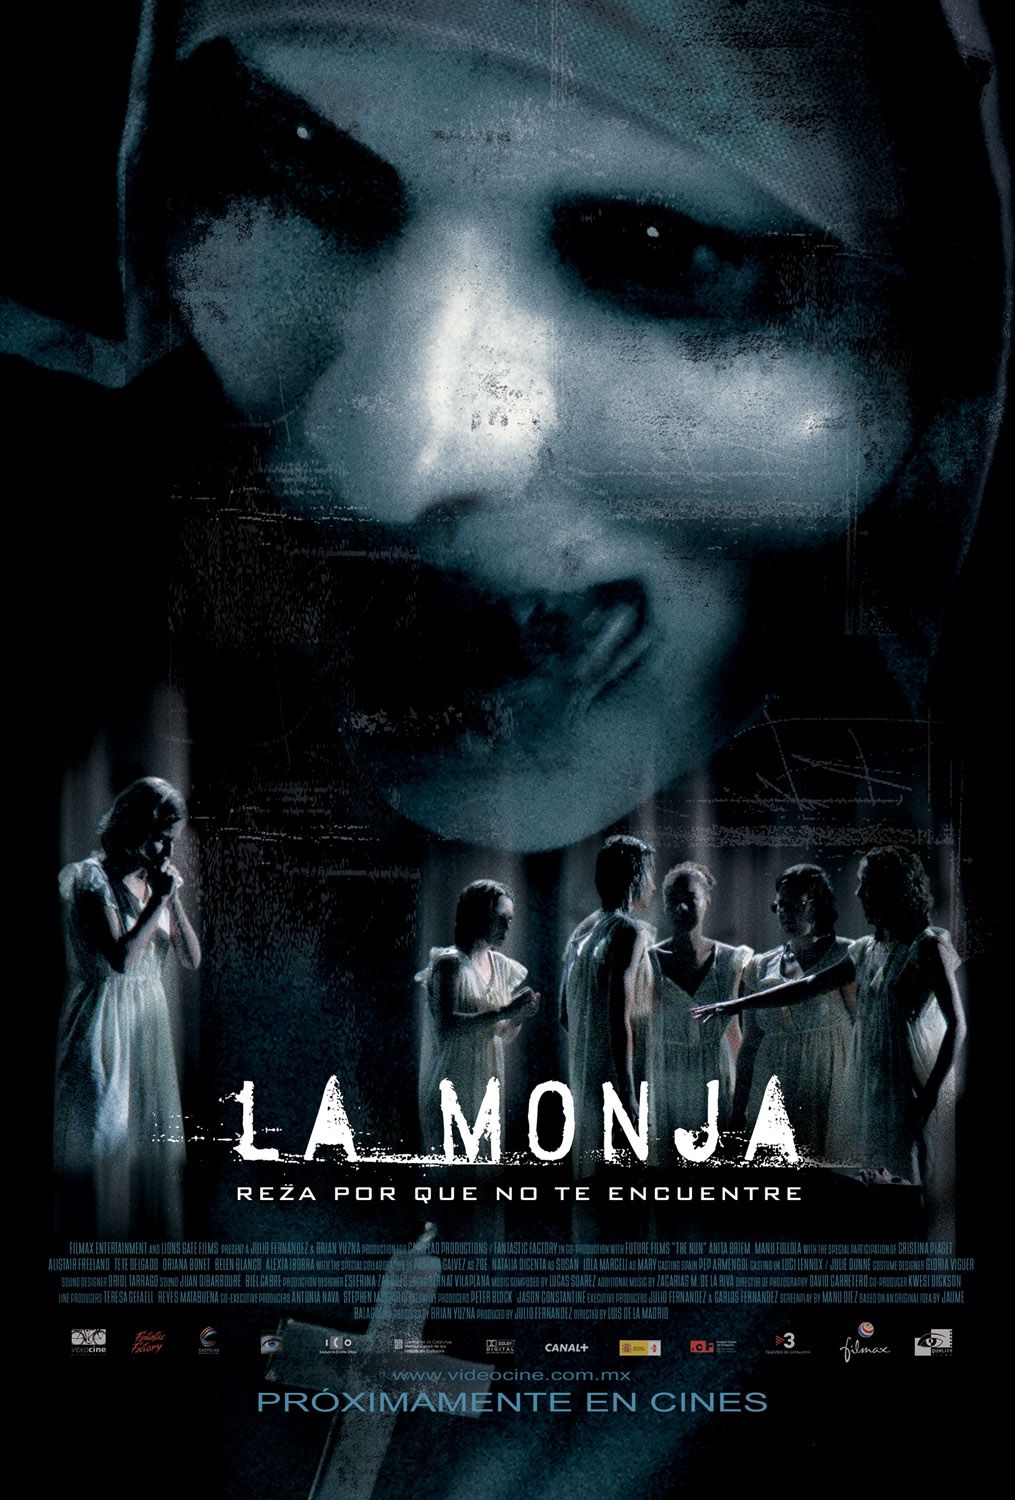 Extra Large Movie Poster Image for La monja (#2 of 2)